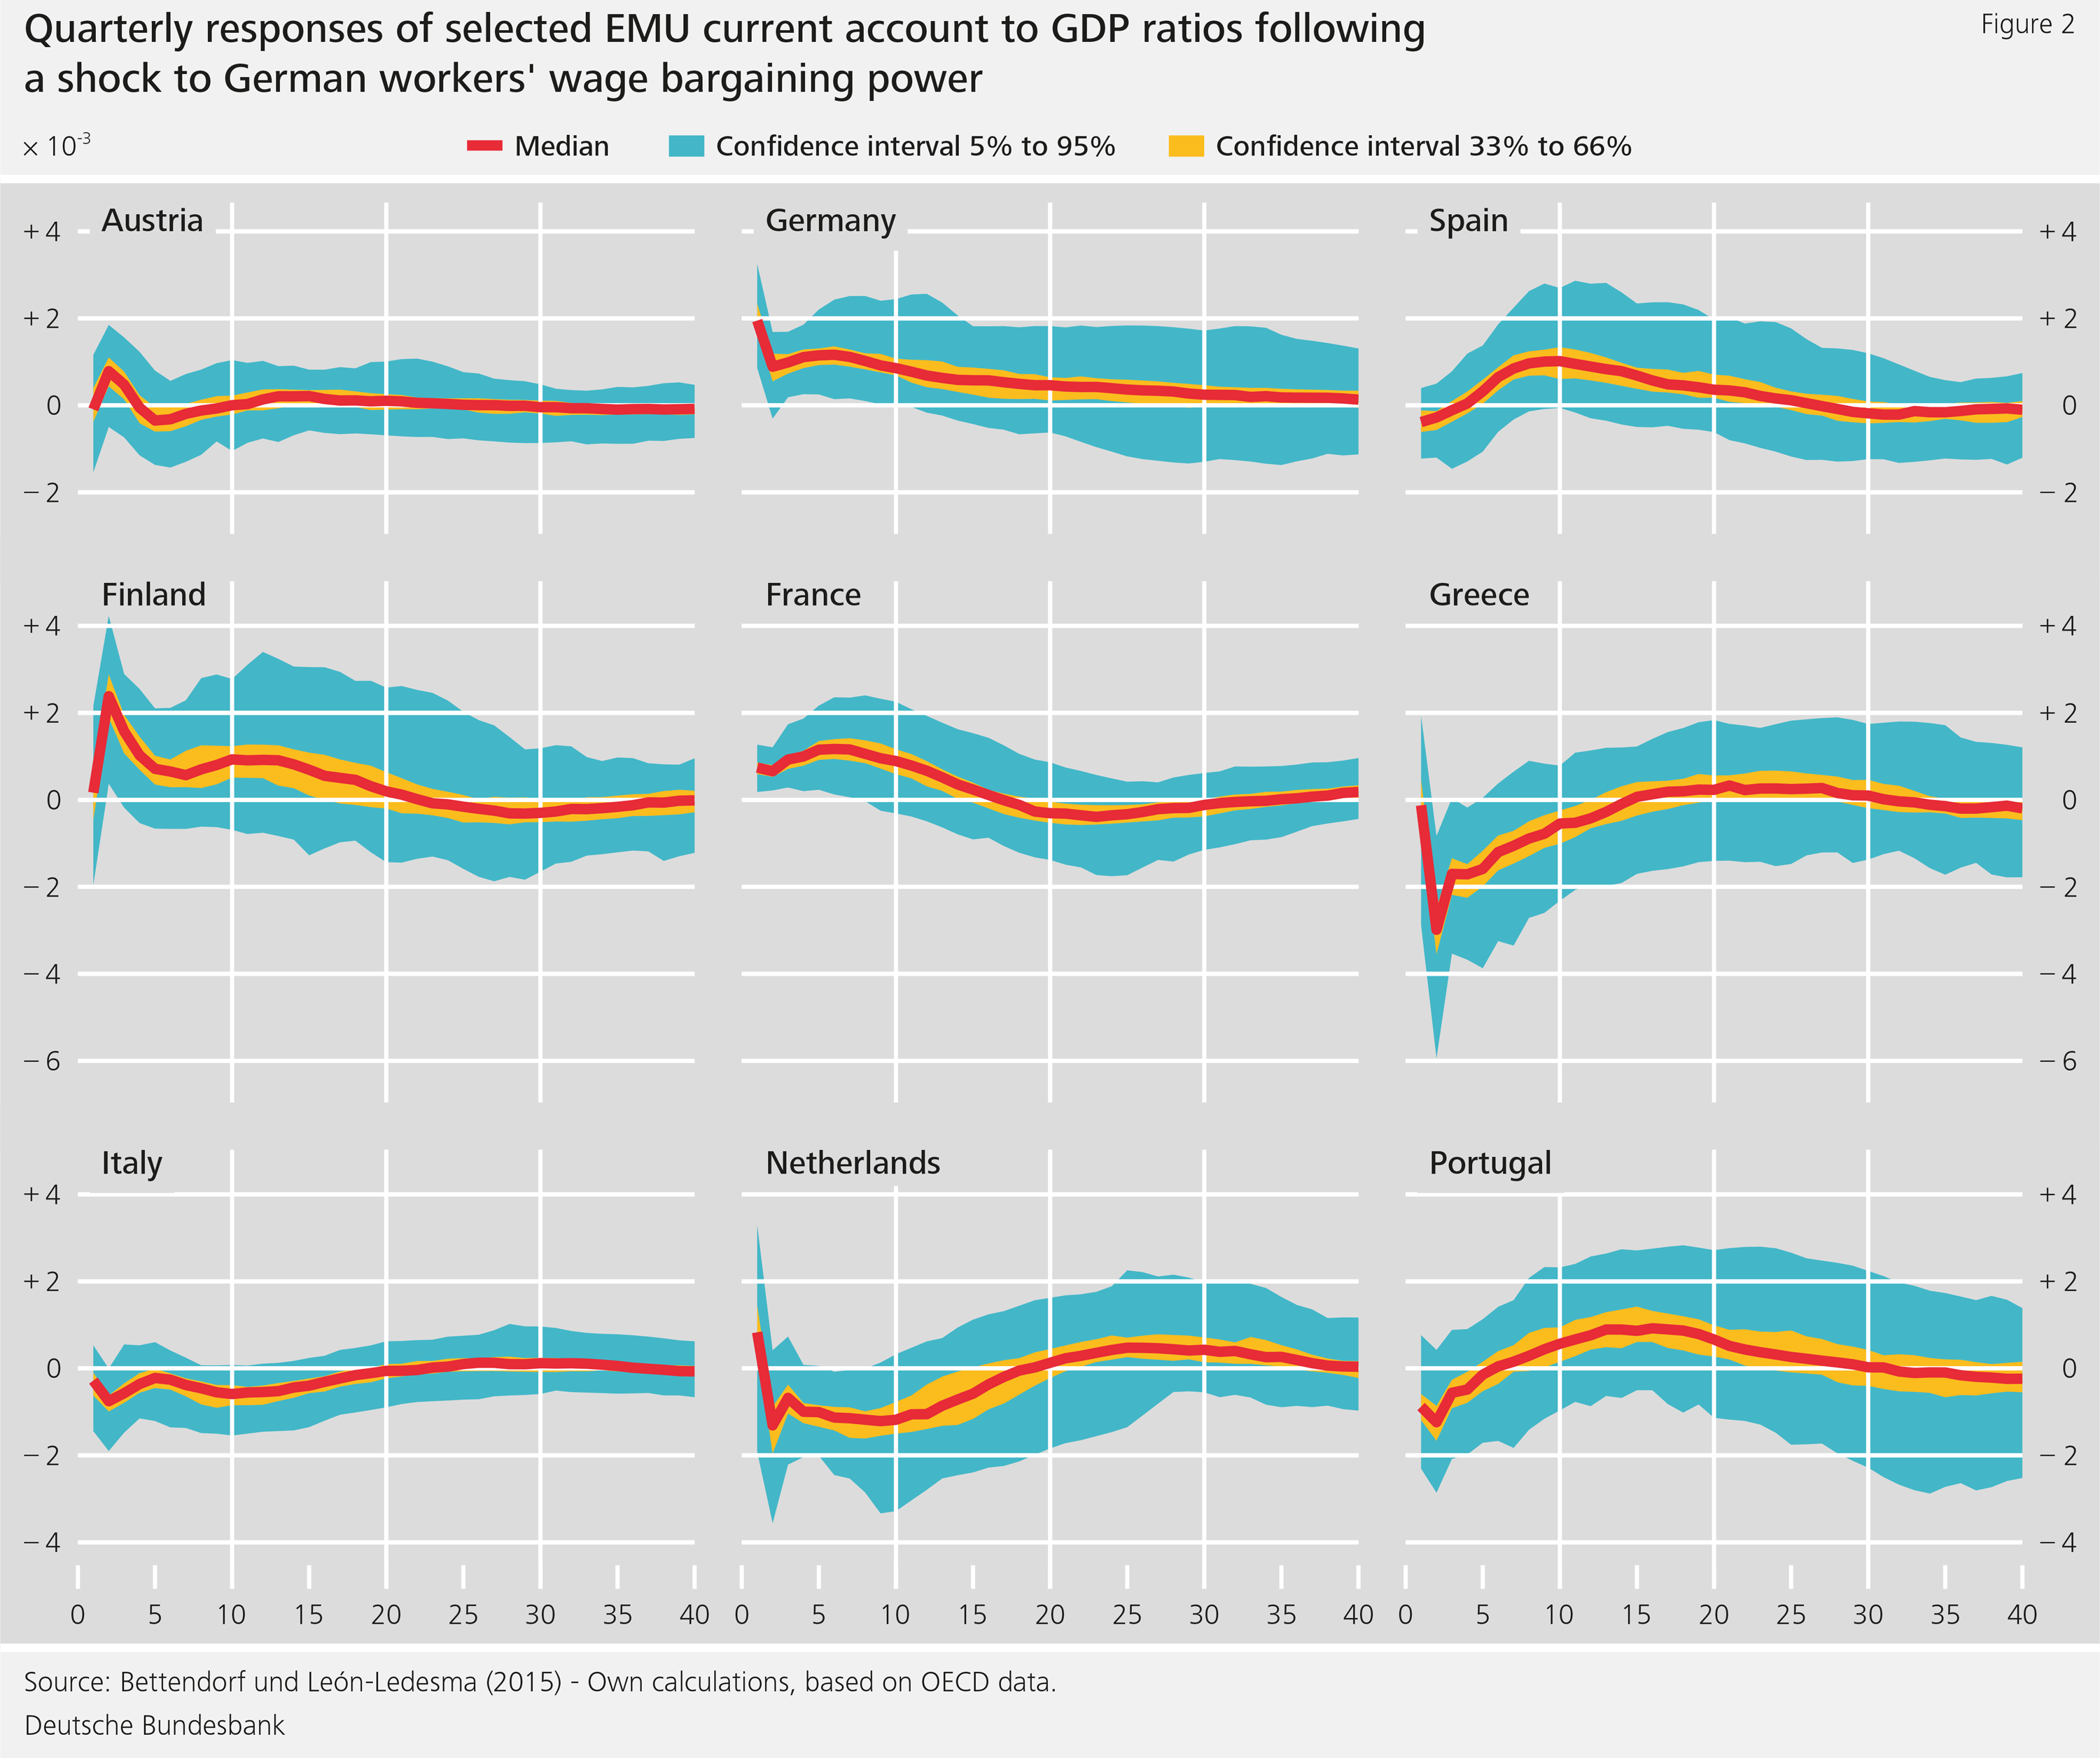 Figure 2: Quarterly responses of selected EMU current account to GDP ratios following a shock to German workers' wage bargaining power